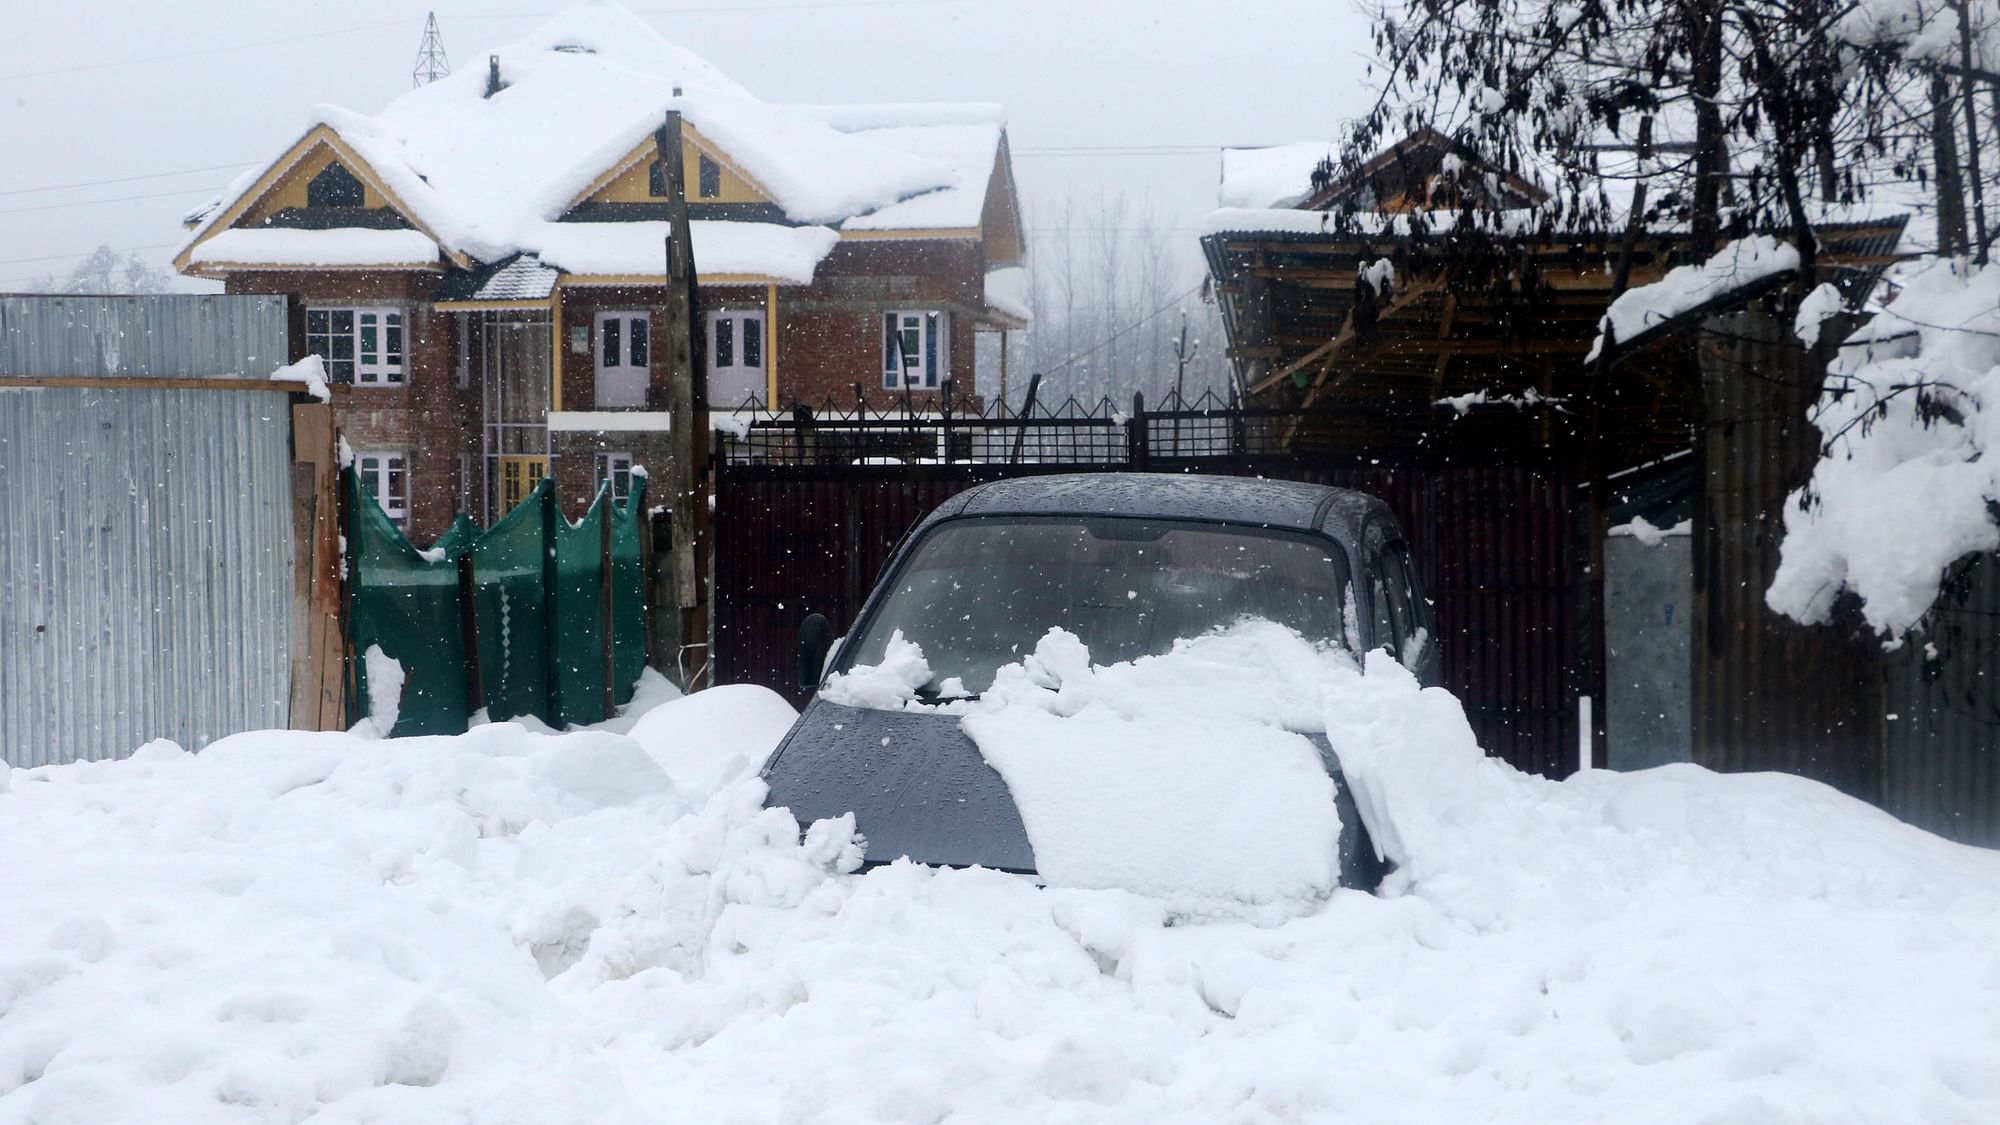 After the heaviest snowfall of the season, many areas of the Kashmir Valley remain cut off as roads have not been cleared of snow.